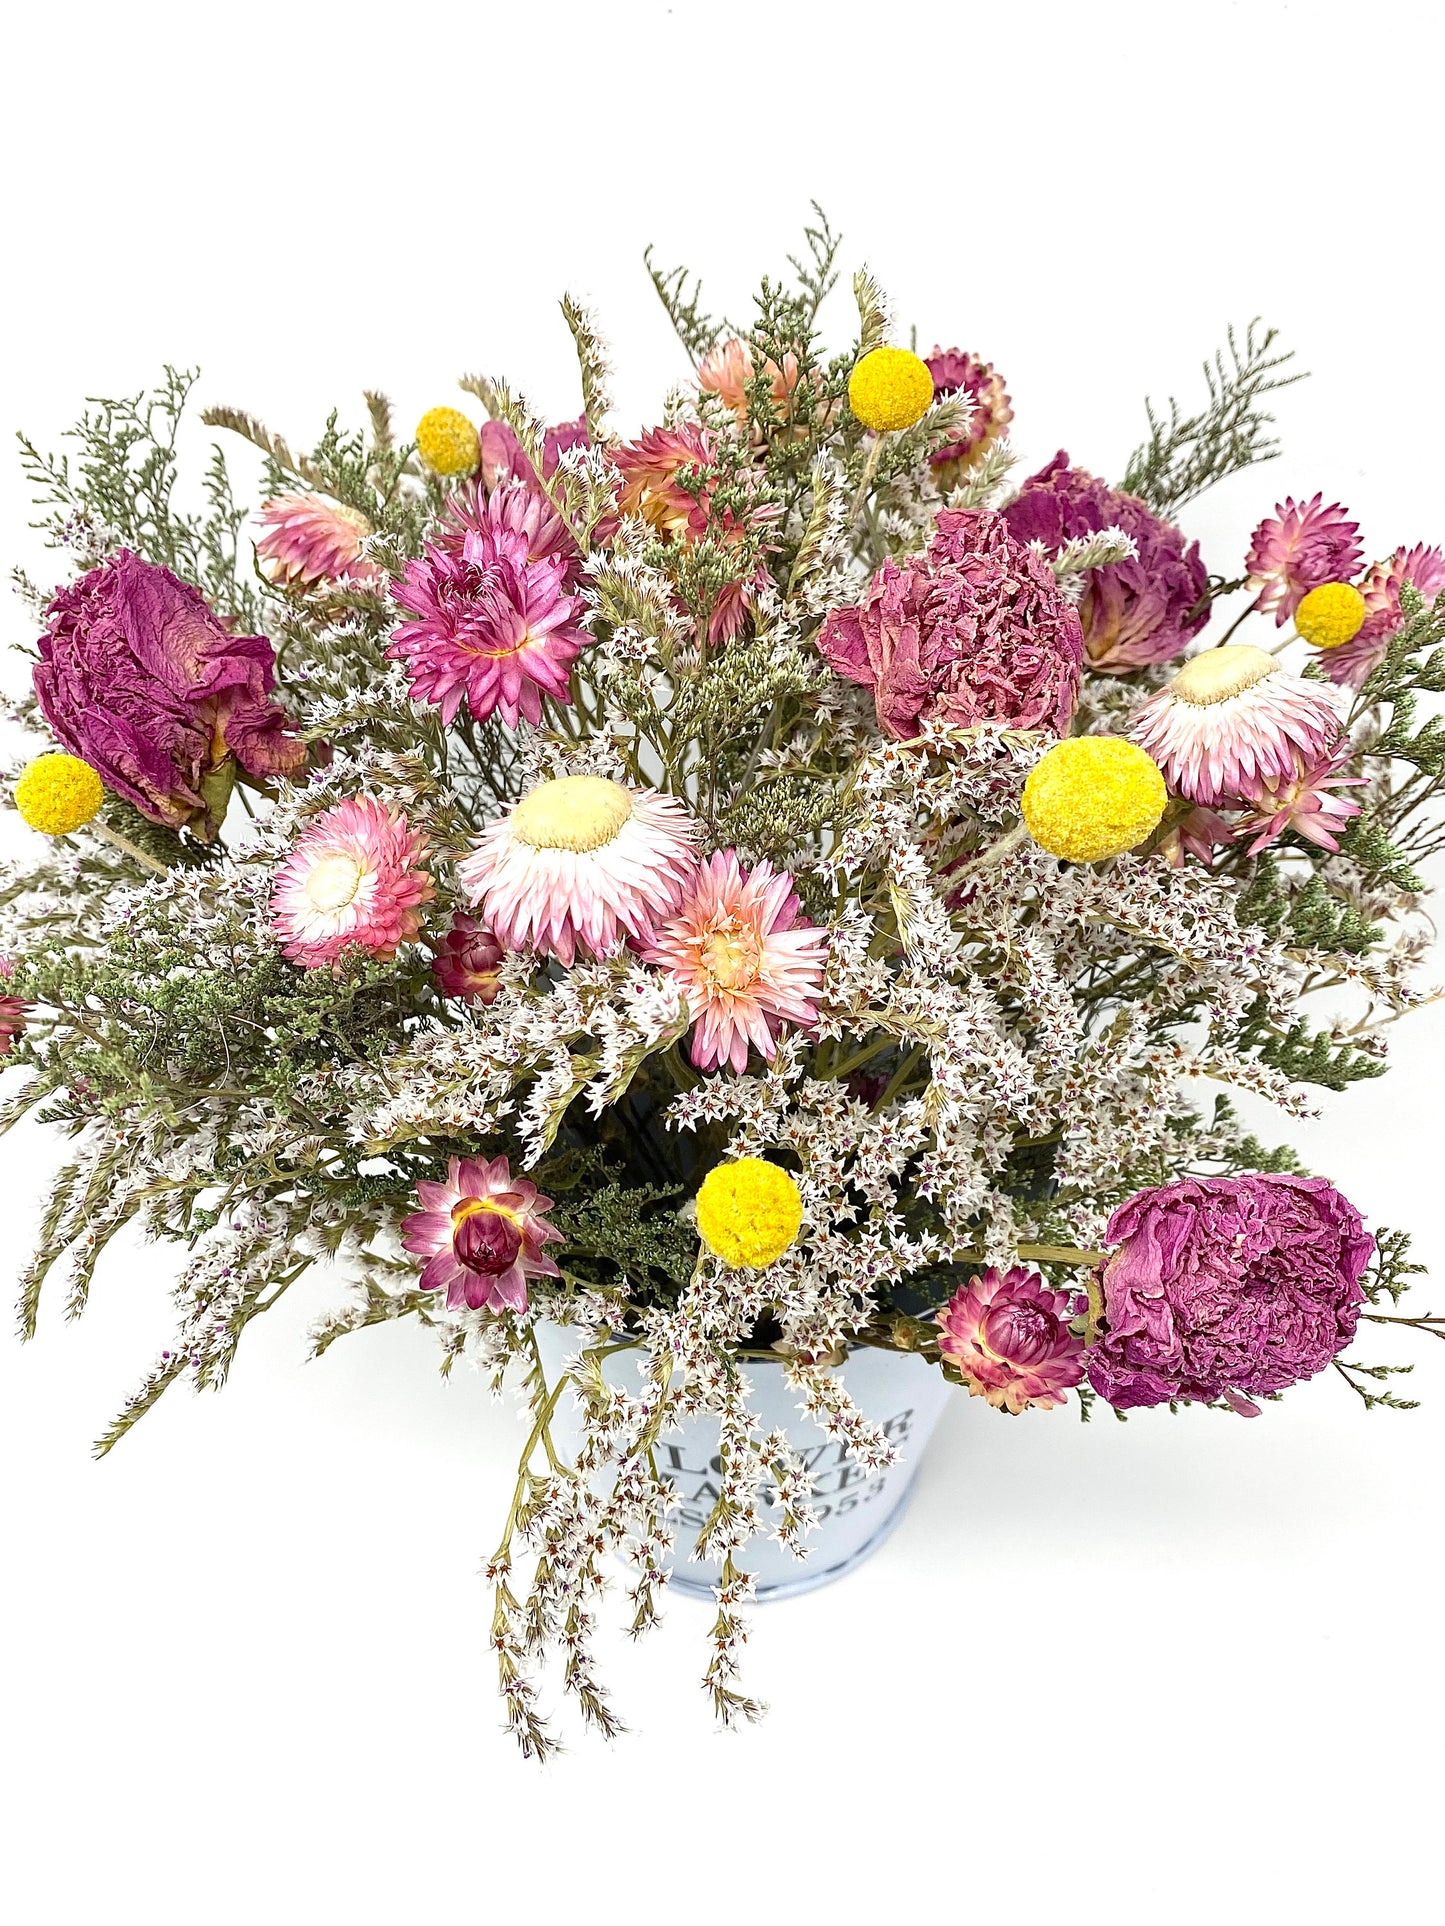 Mothers Day Flower Arrangement, Dried Floral, Spring Bouquet, White Bucket, Pink, Purple, Preserved, Peonies, Natural Flowers, Center Piece